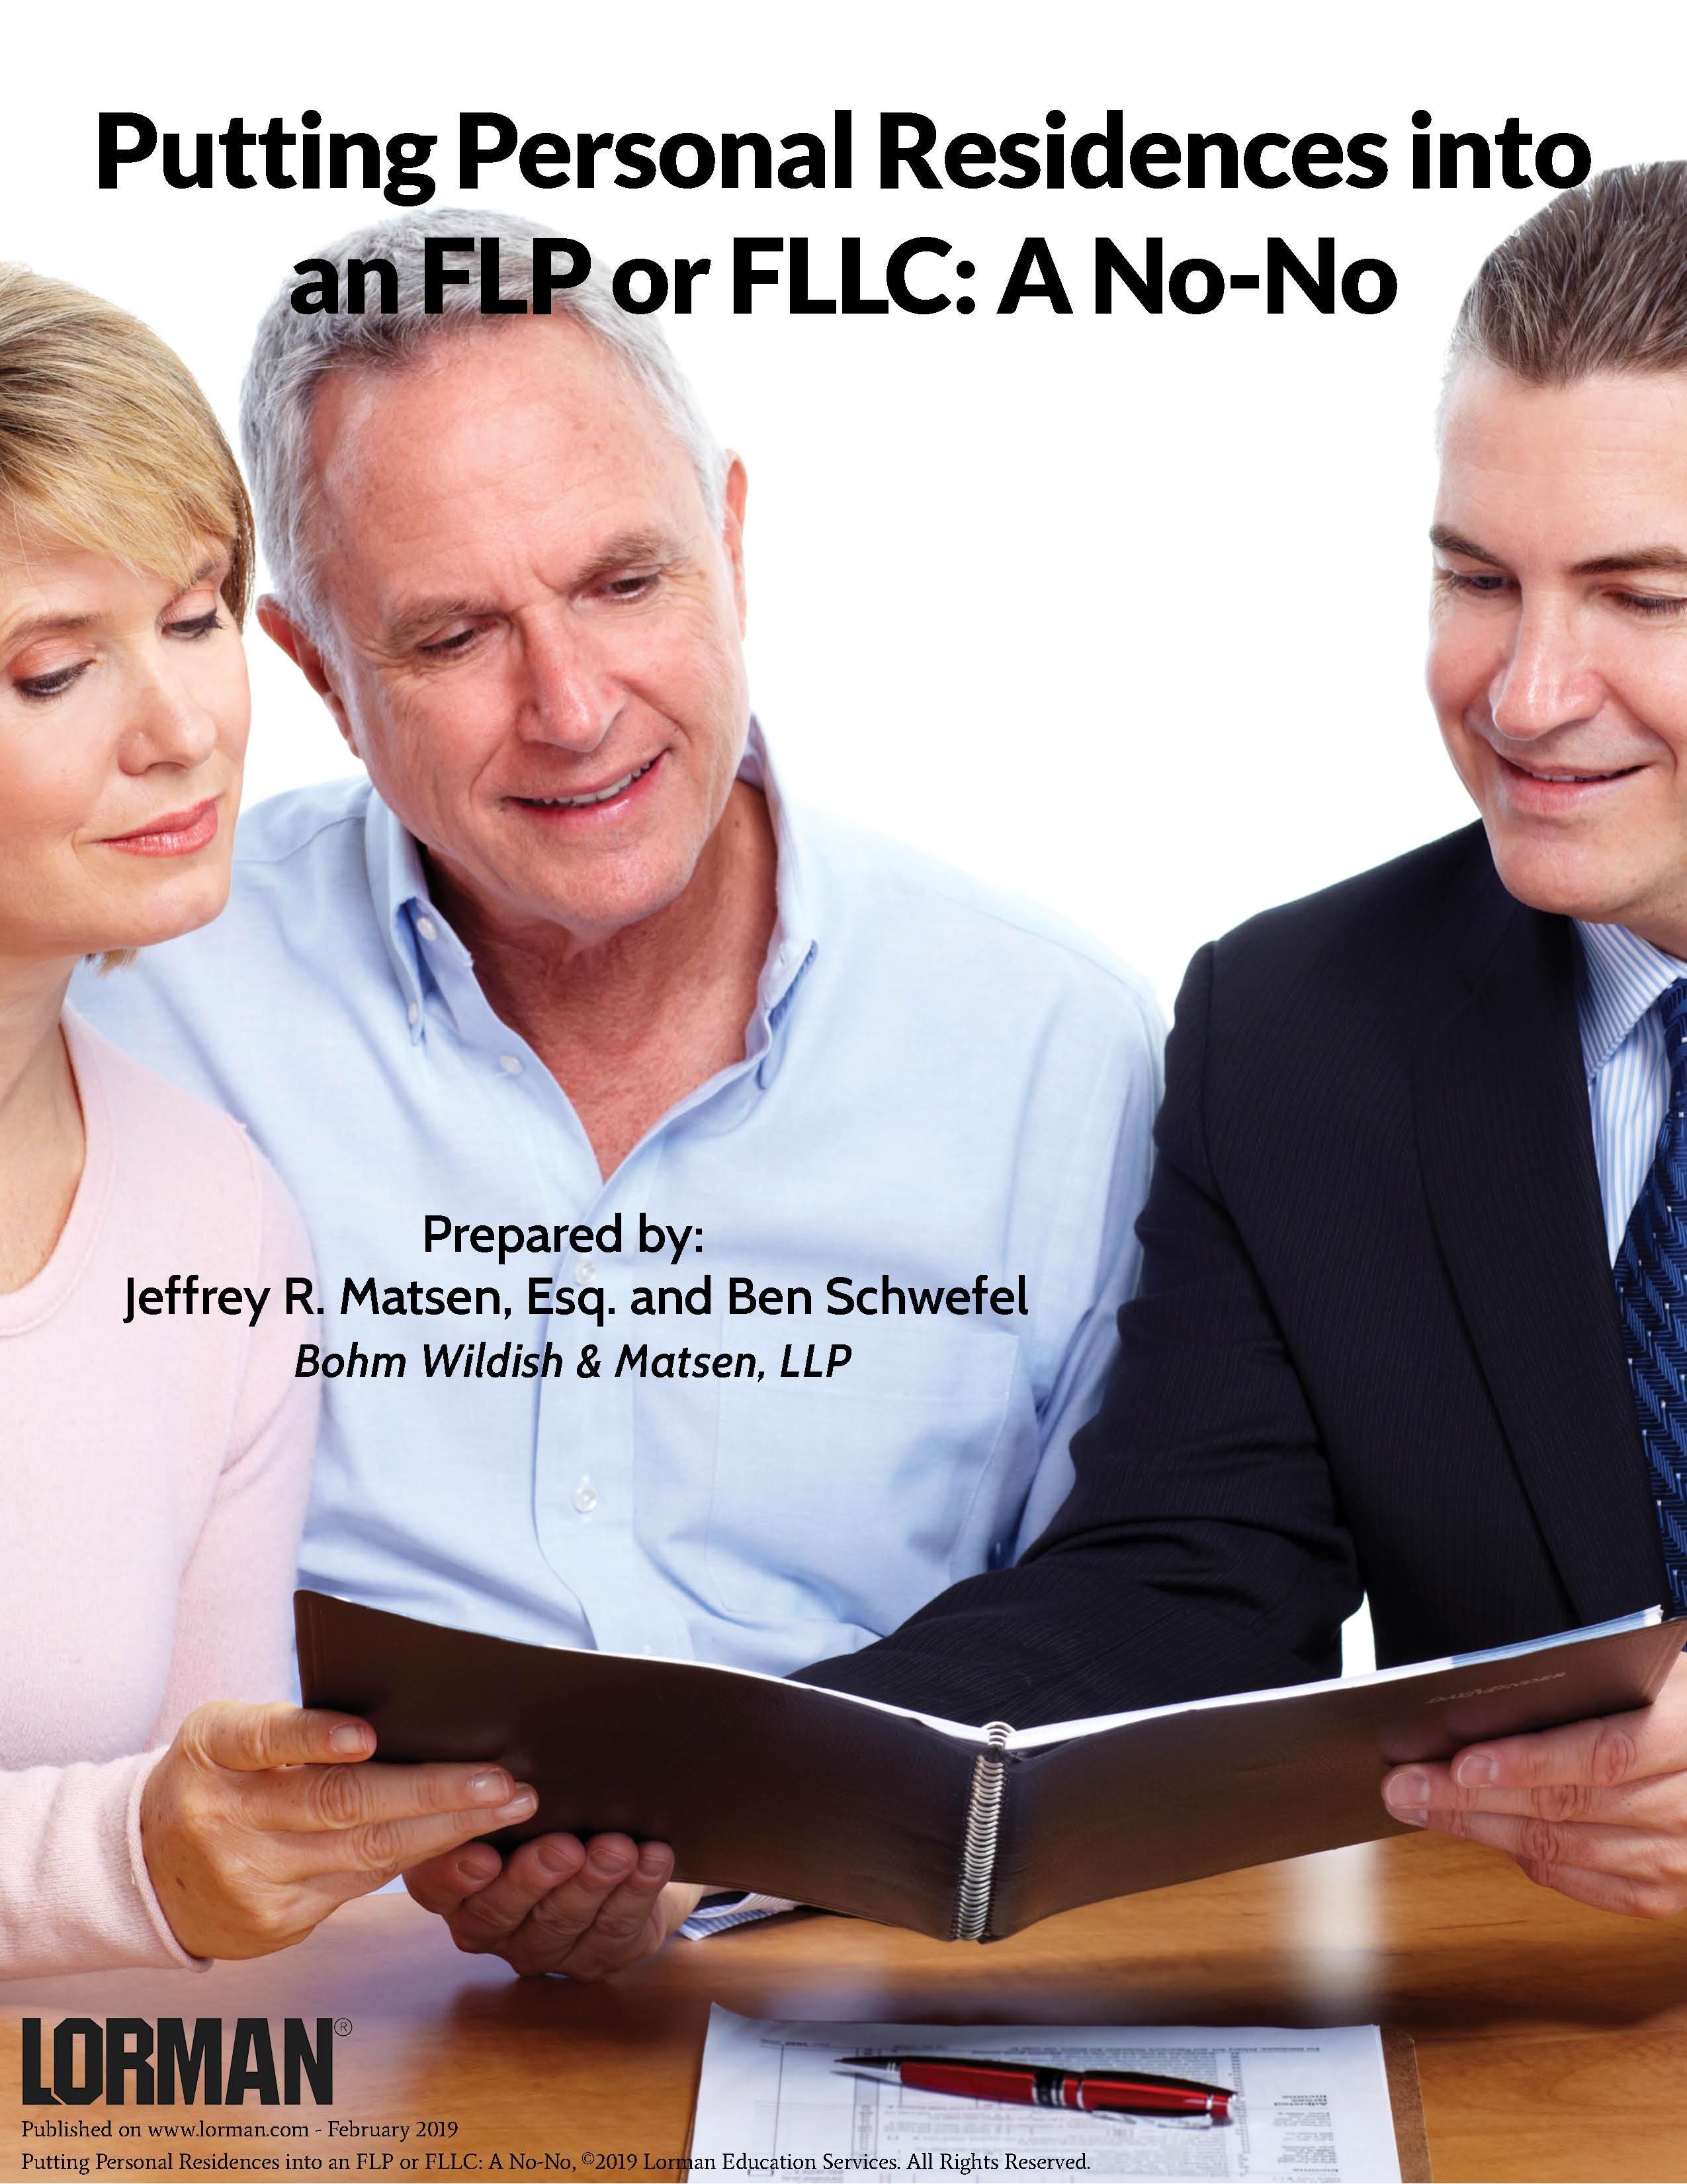 Putting Personal Residences into an FLP or FLLC: A No-No